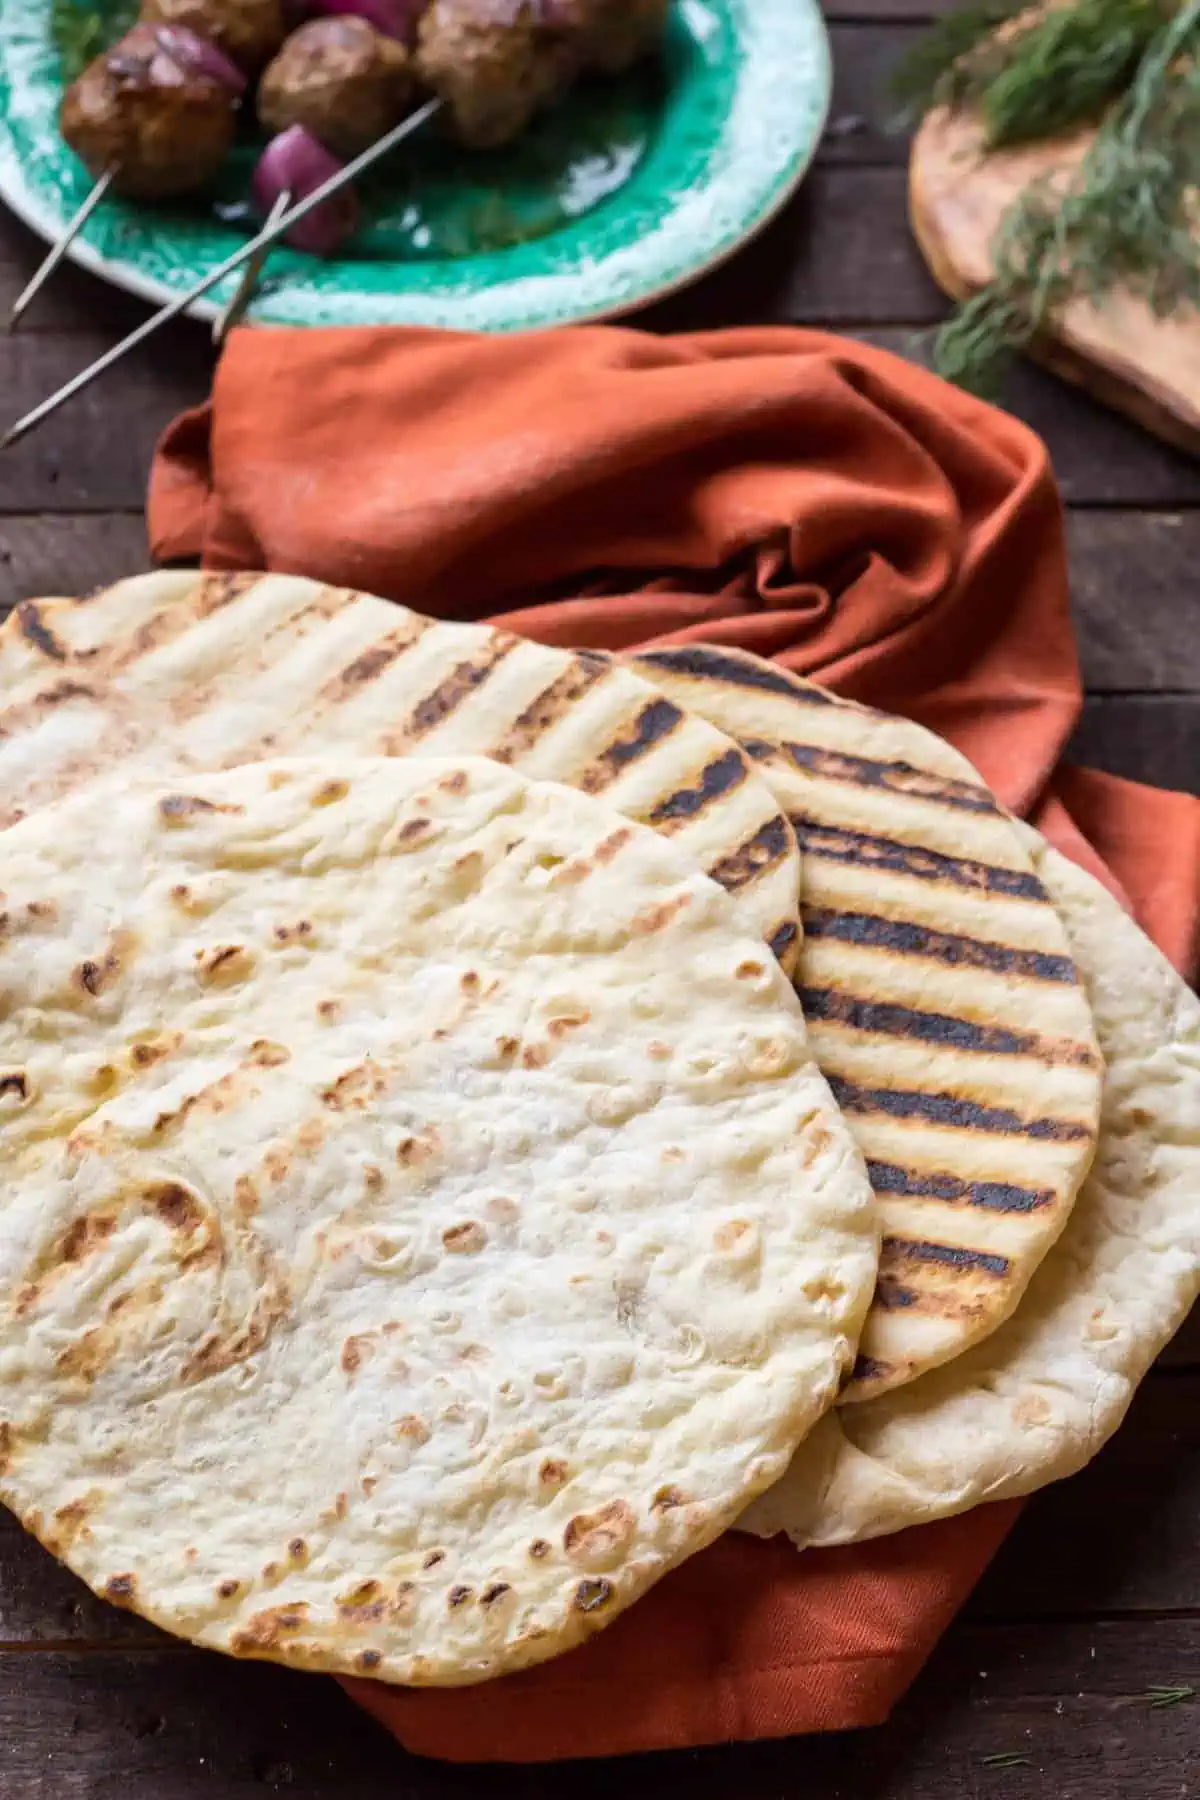 Grilled pita bread on a red napkin.